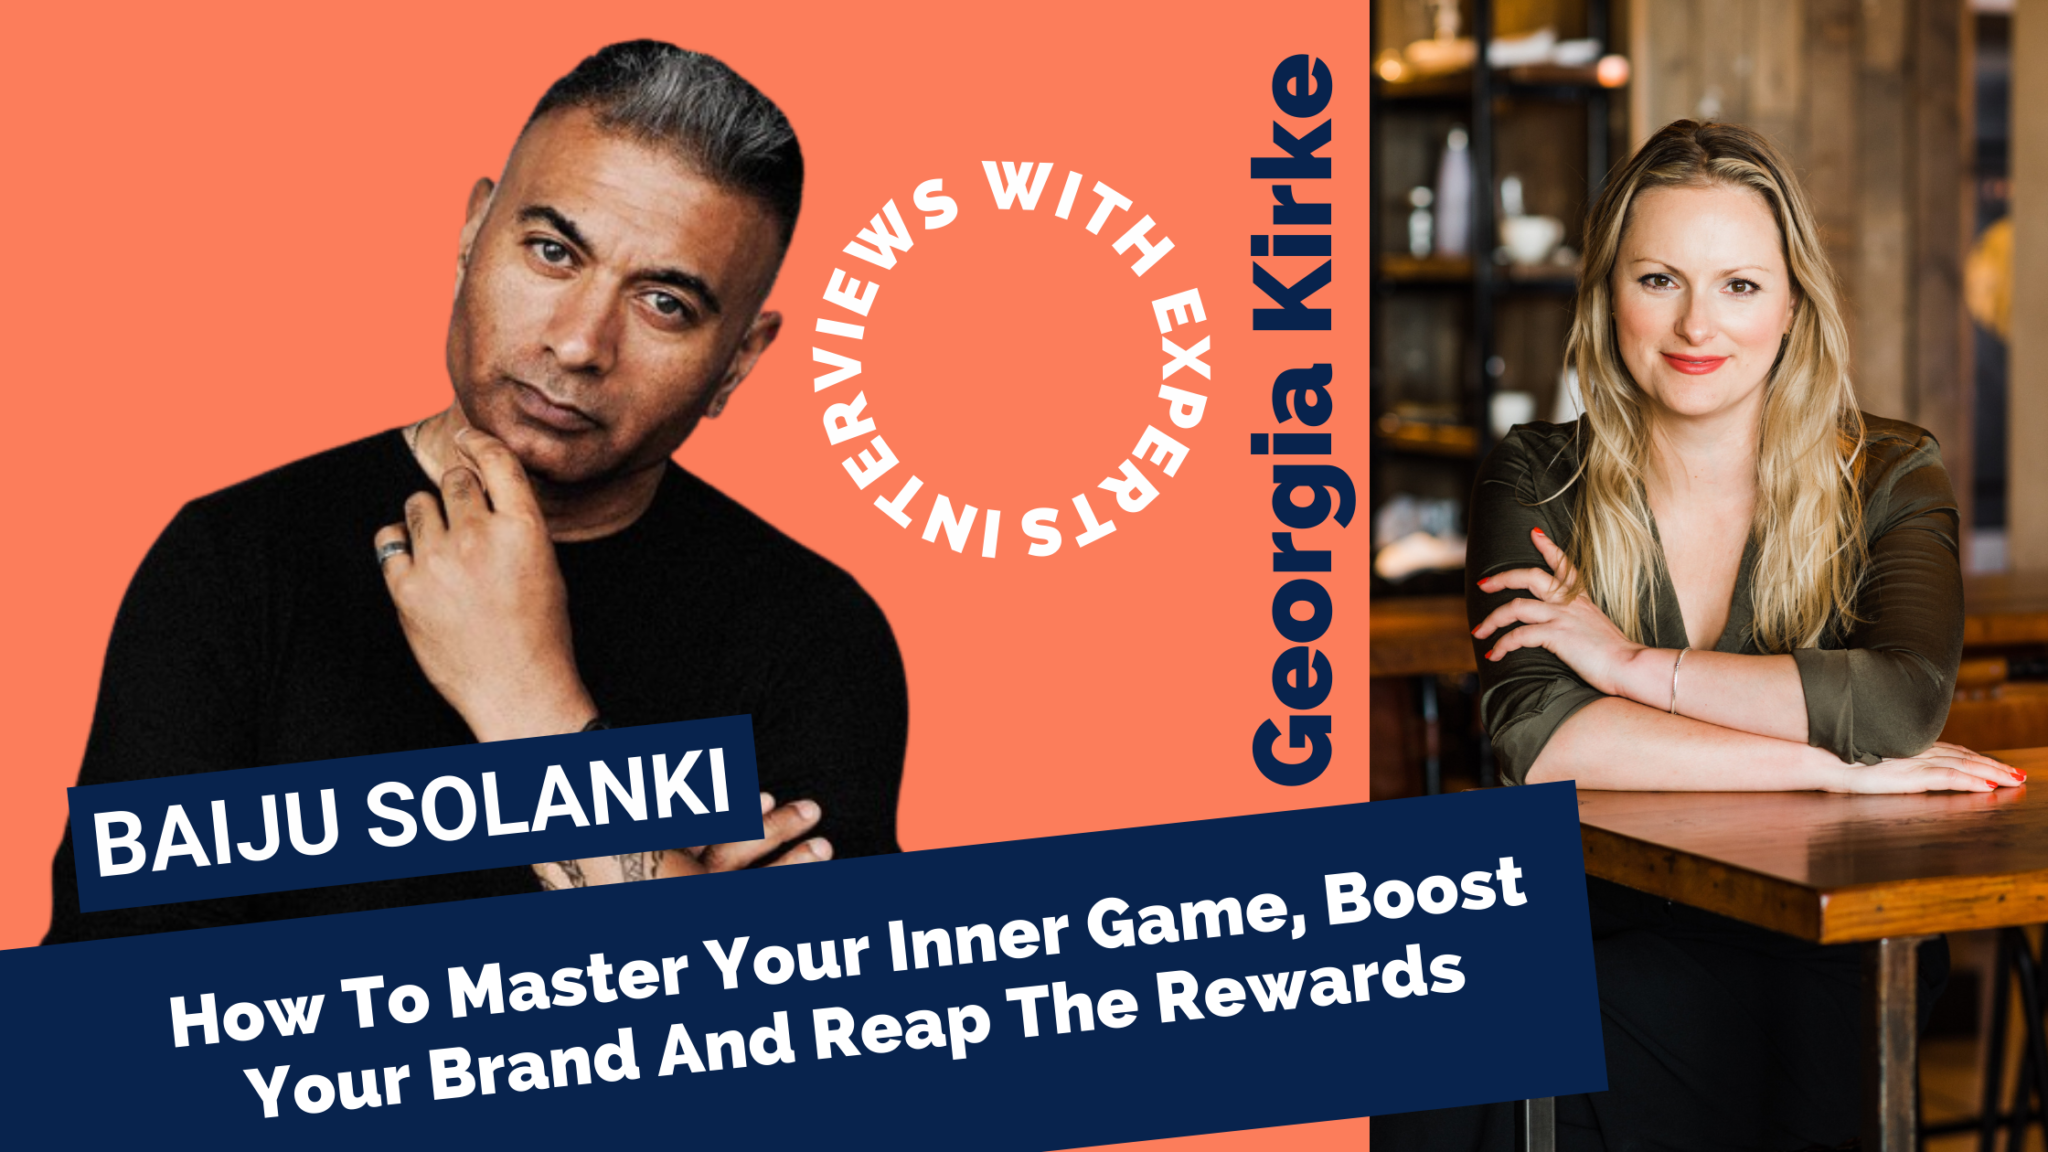 How To Master Your Inner Game, Boost Your Brand And Reap The Rewards By Georgia Kirke with special guest Baiju Solanki 